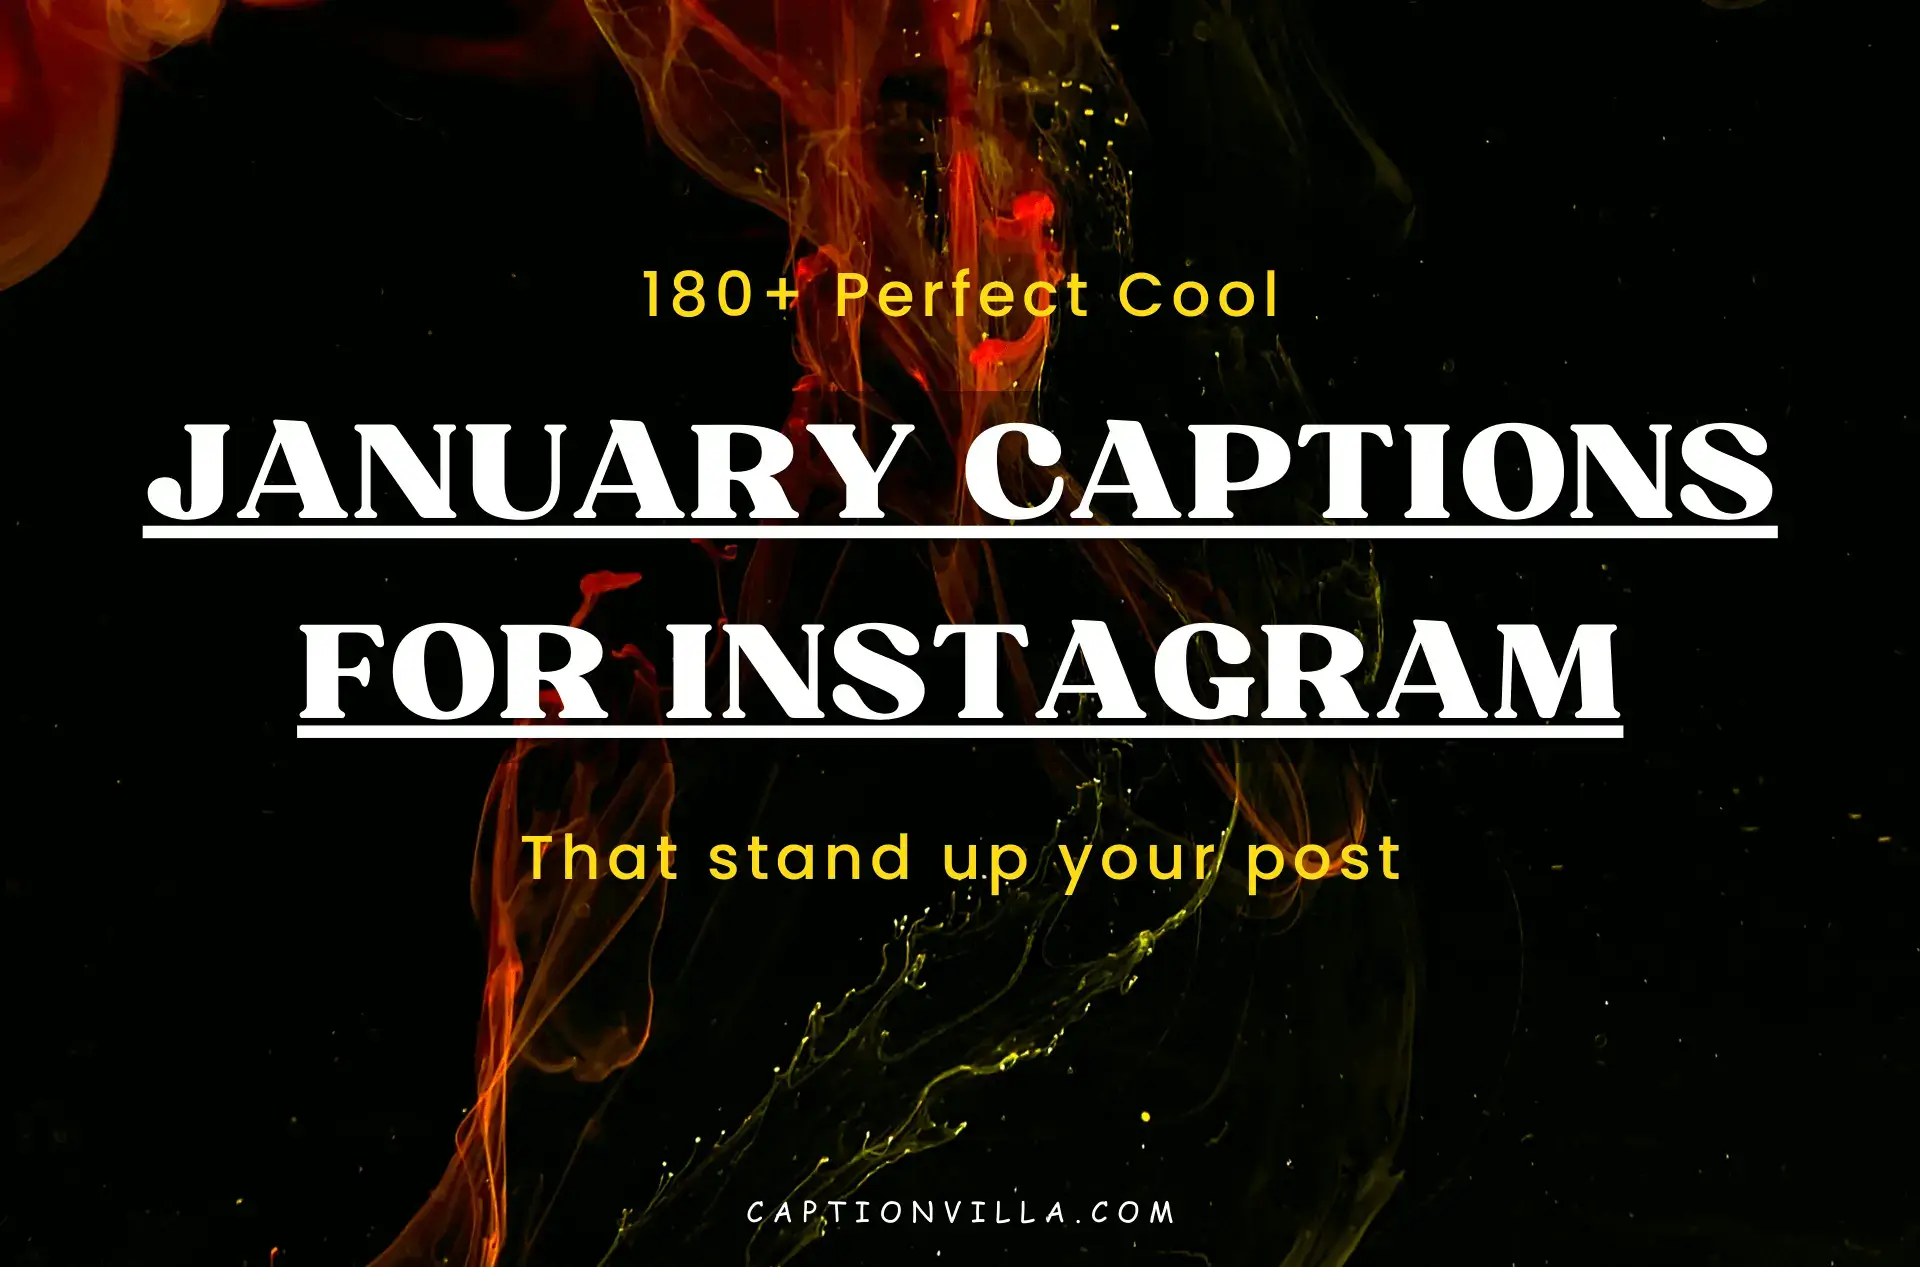 This image includes the title of January Captions for Instagram